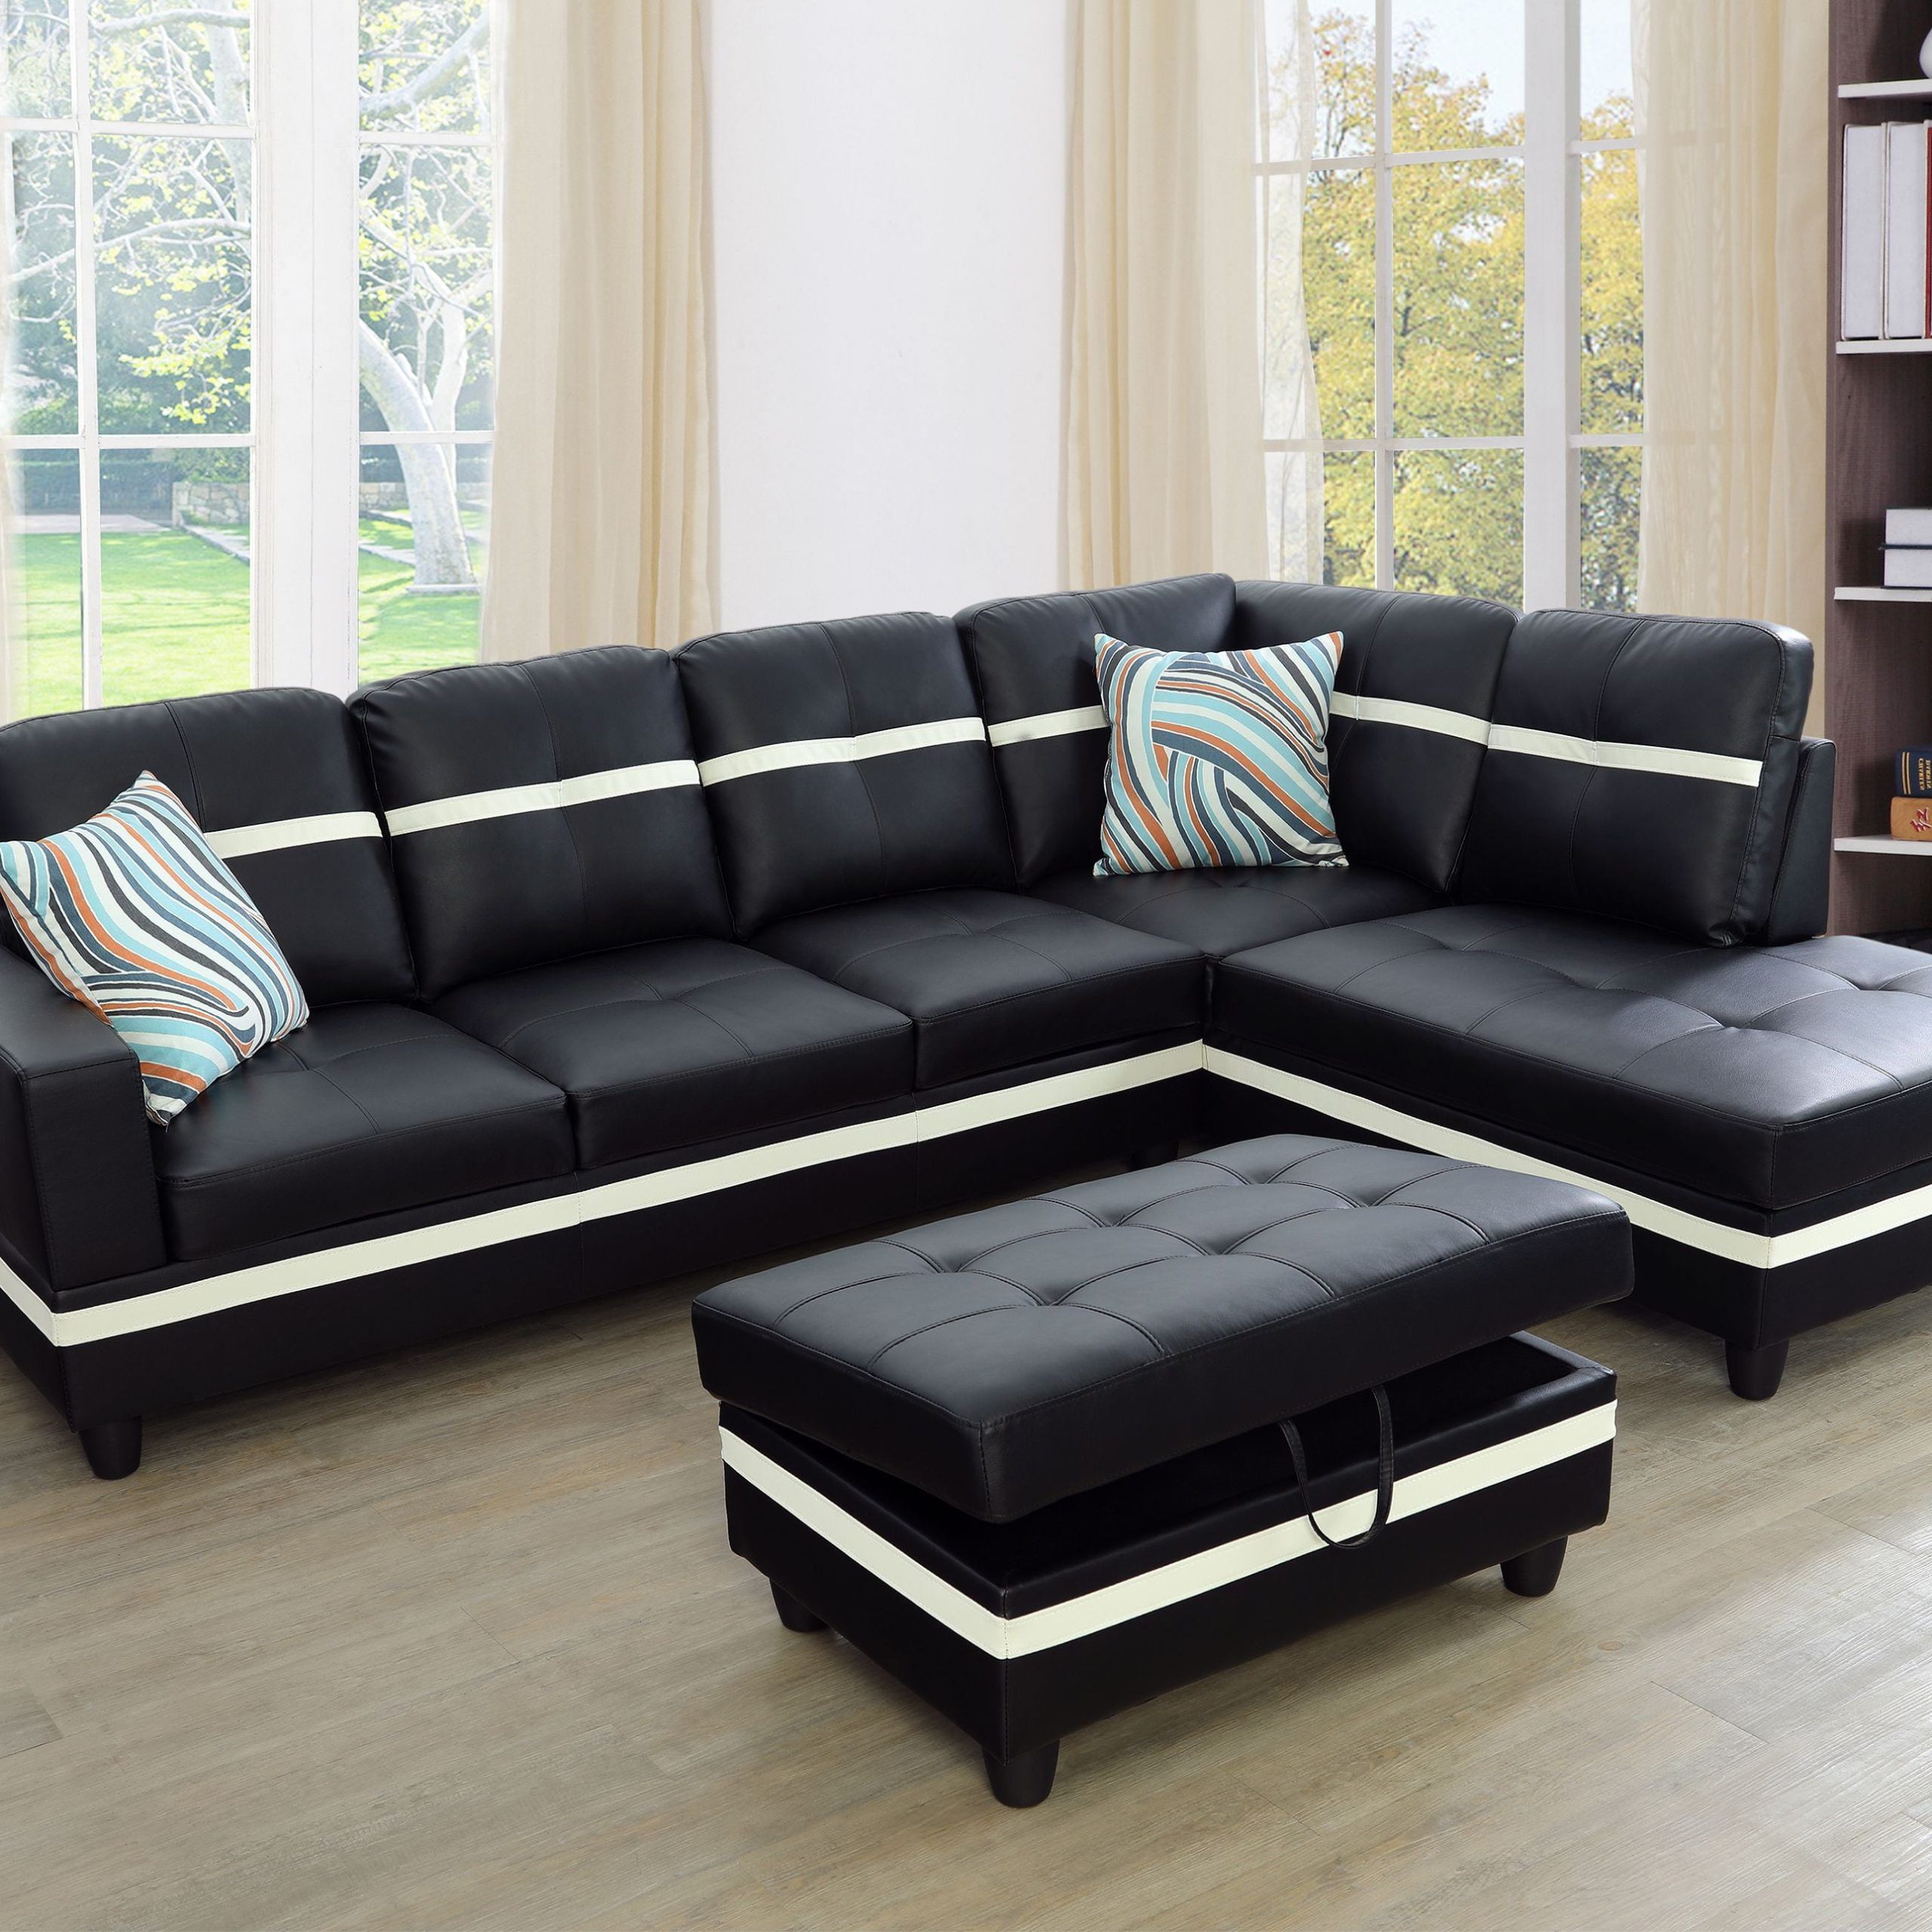 Aycp Furniture_new Style_ L Shape Sectional Sofa Set With Storage Inside Sofas With Ottomans (Gallery 11 of 20)